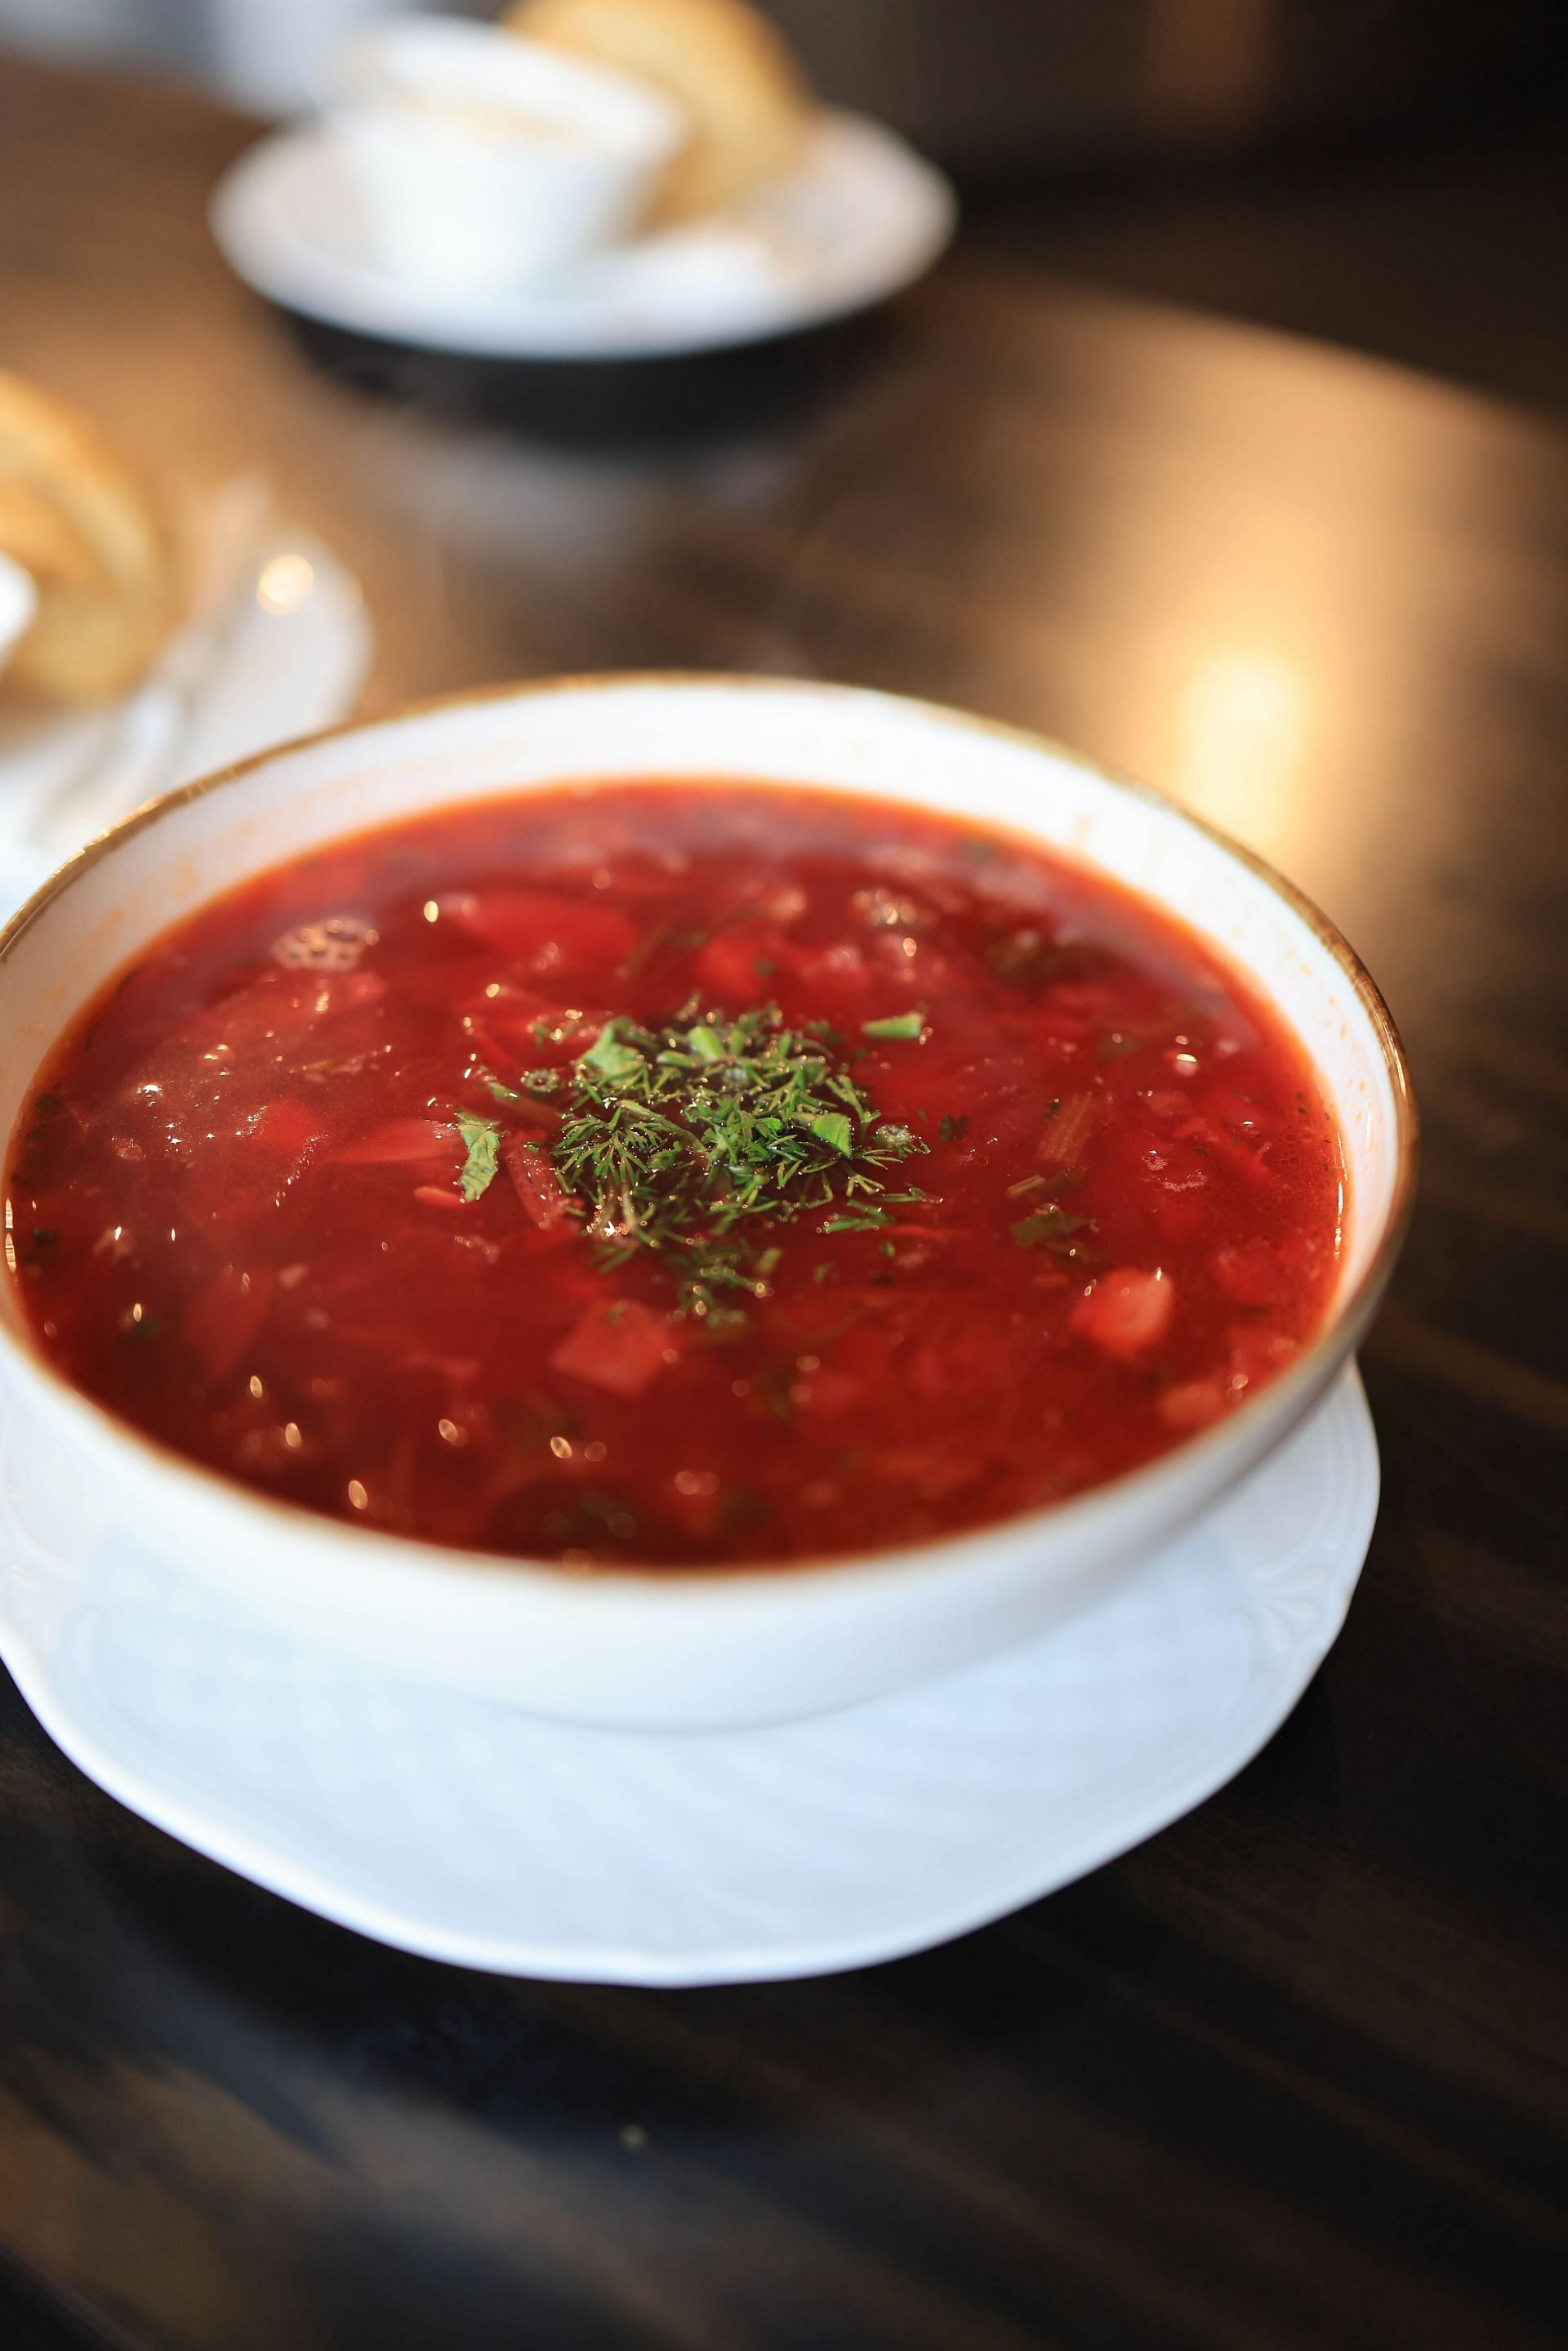 Cooling and Hydrating Tomato-Based Soup (Image source/ Pexels)